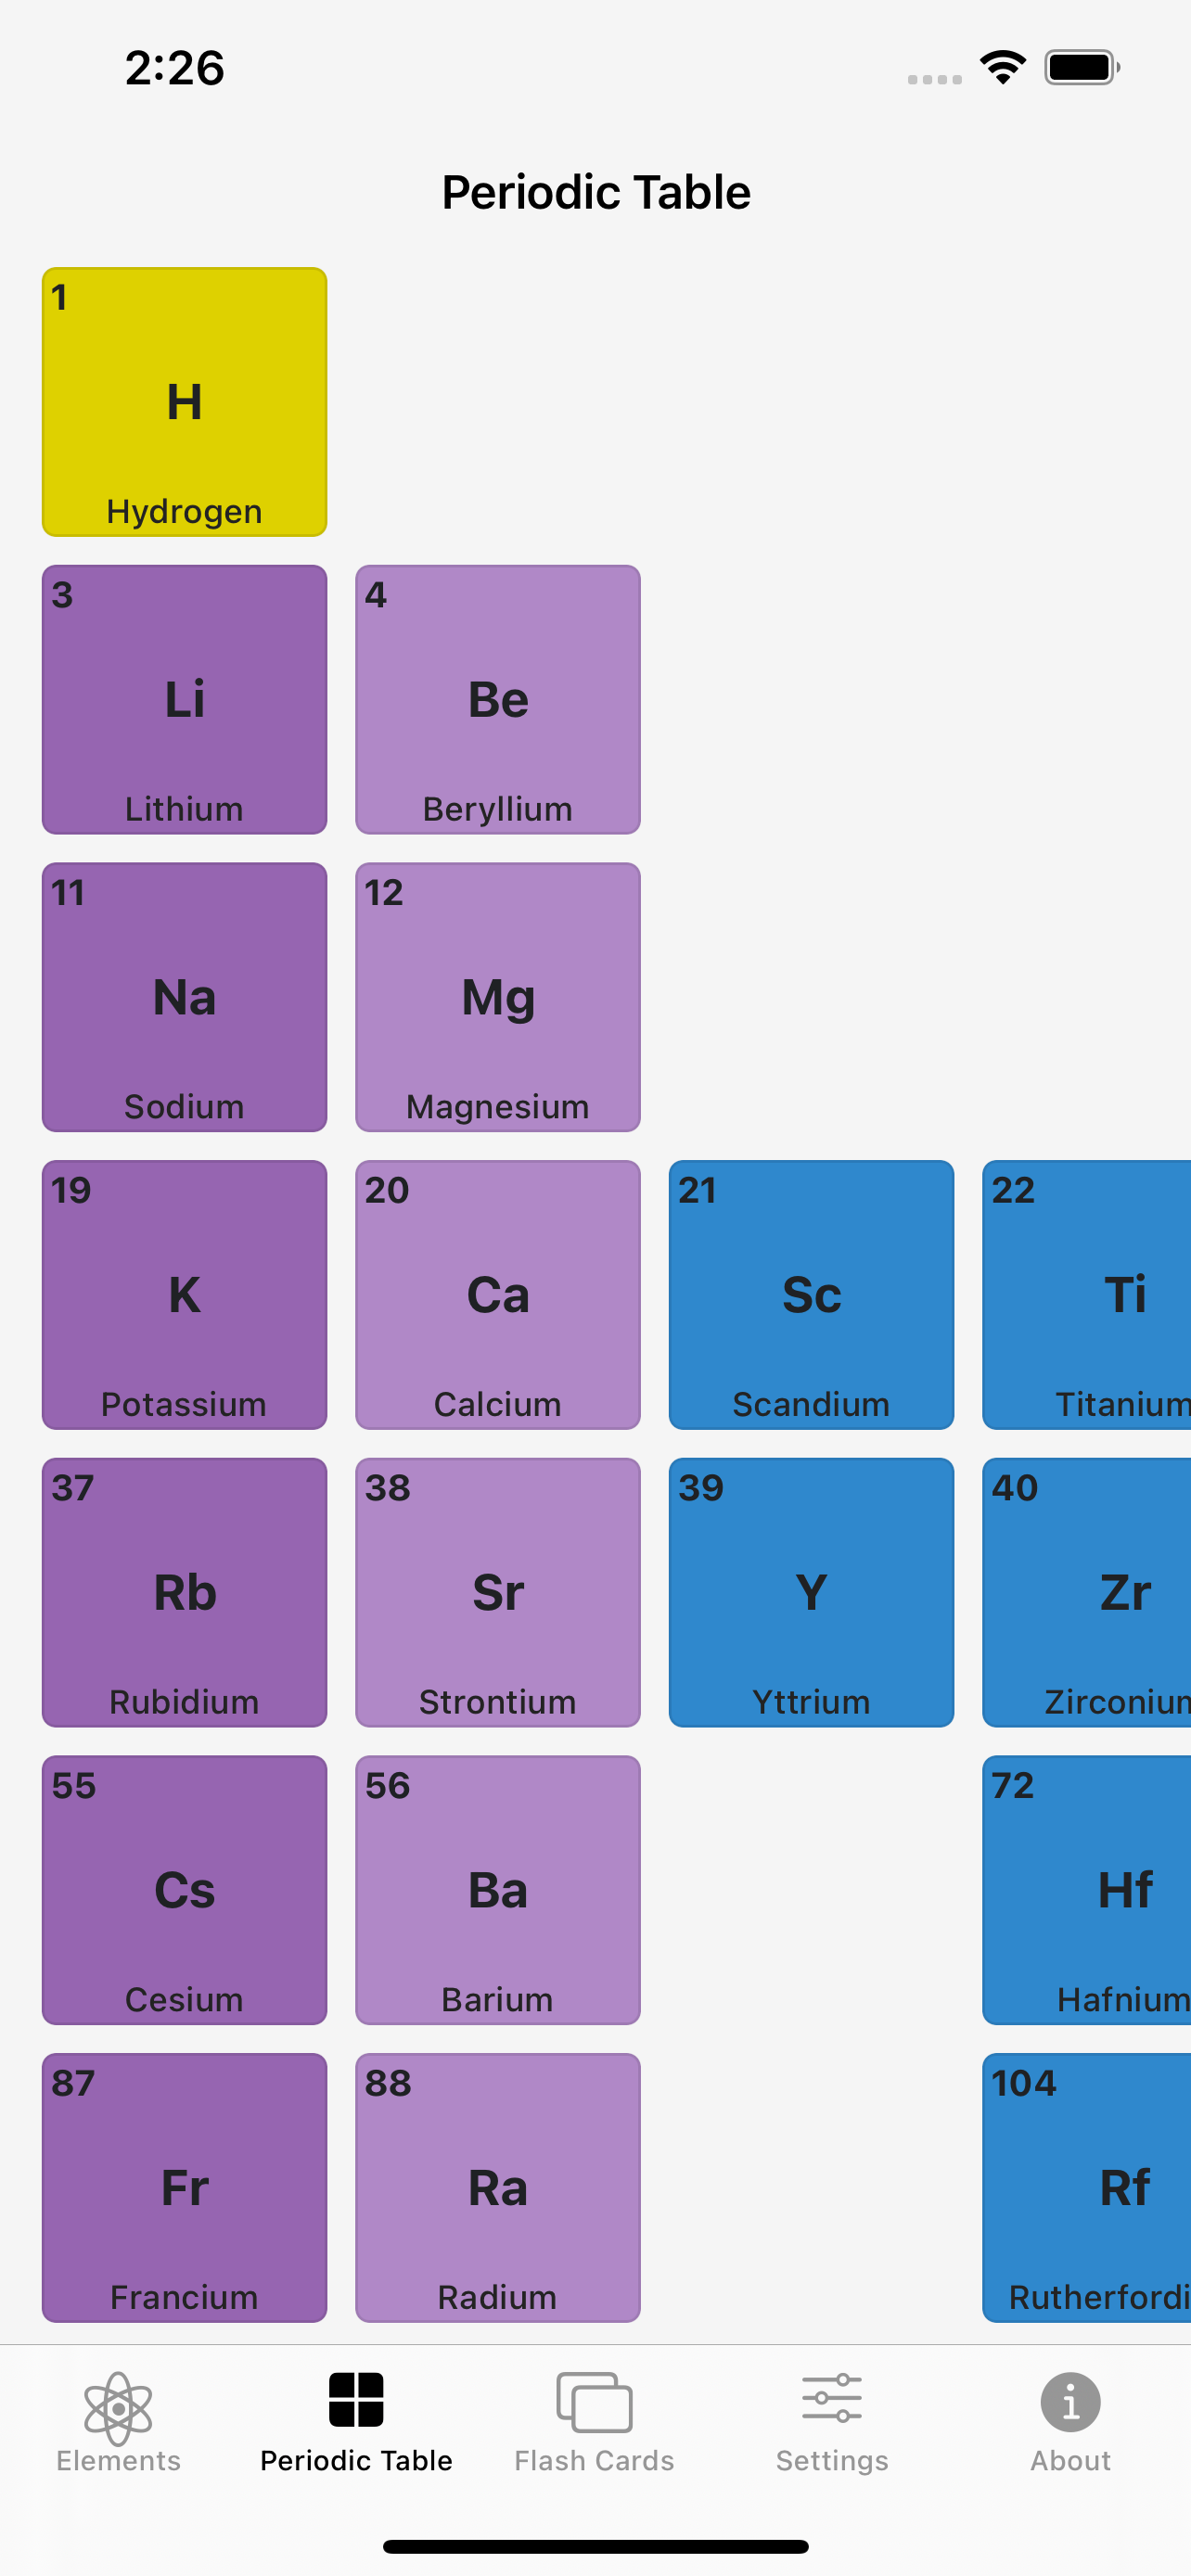 Handy periodic table view